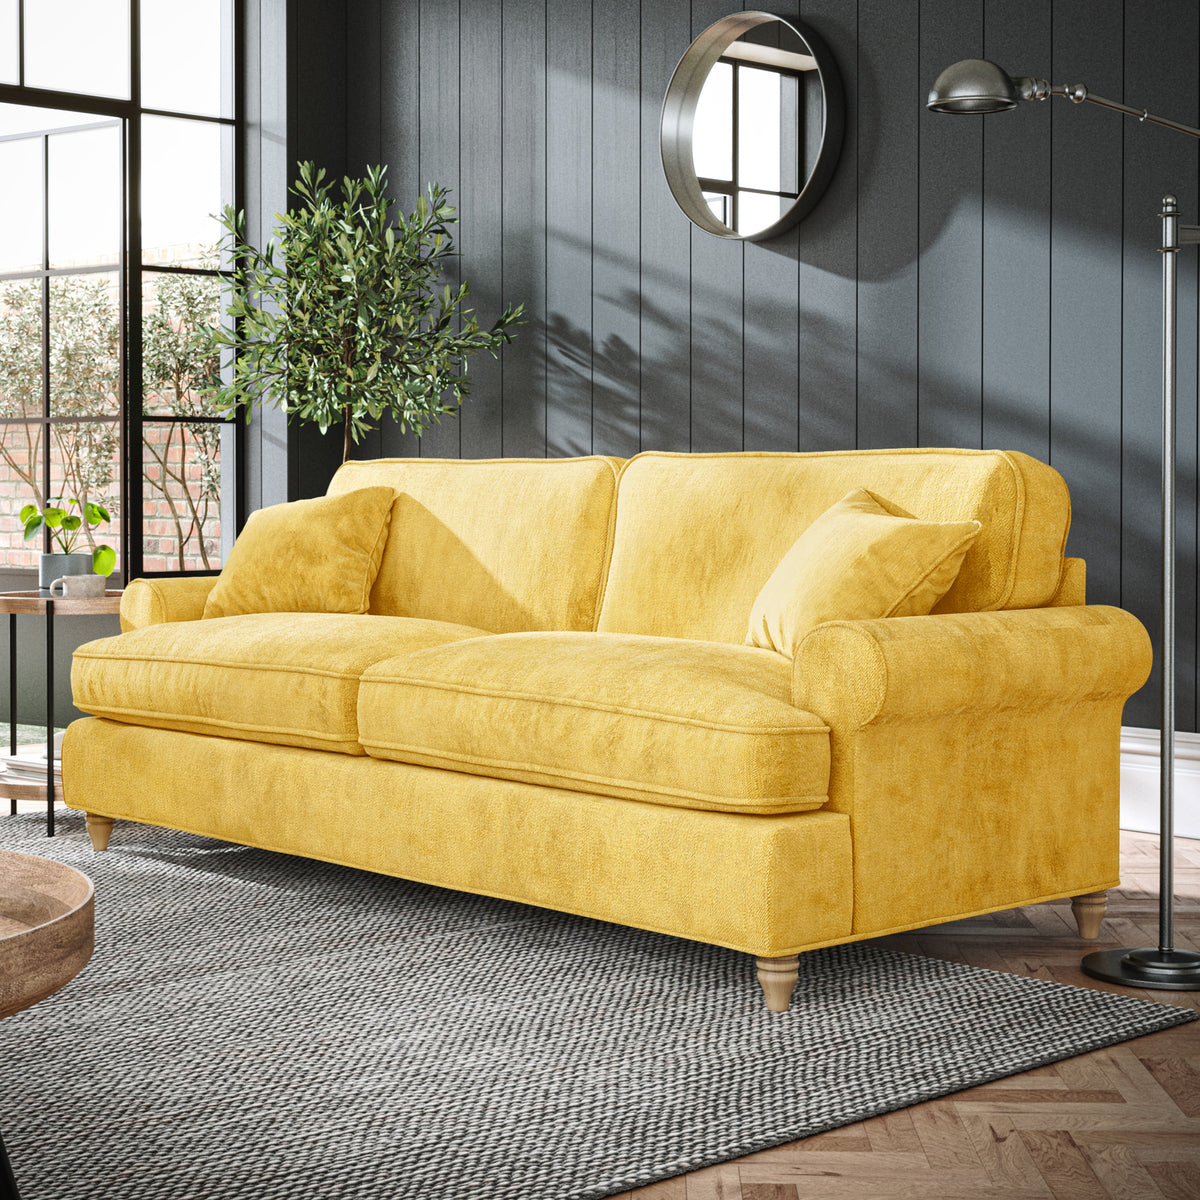 Alfie Gold 4 Seater Sofa from Roseland Furniture